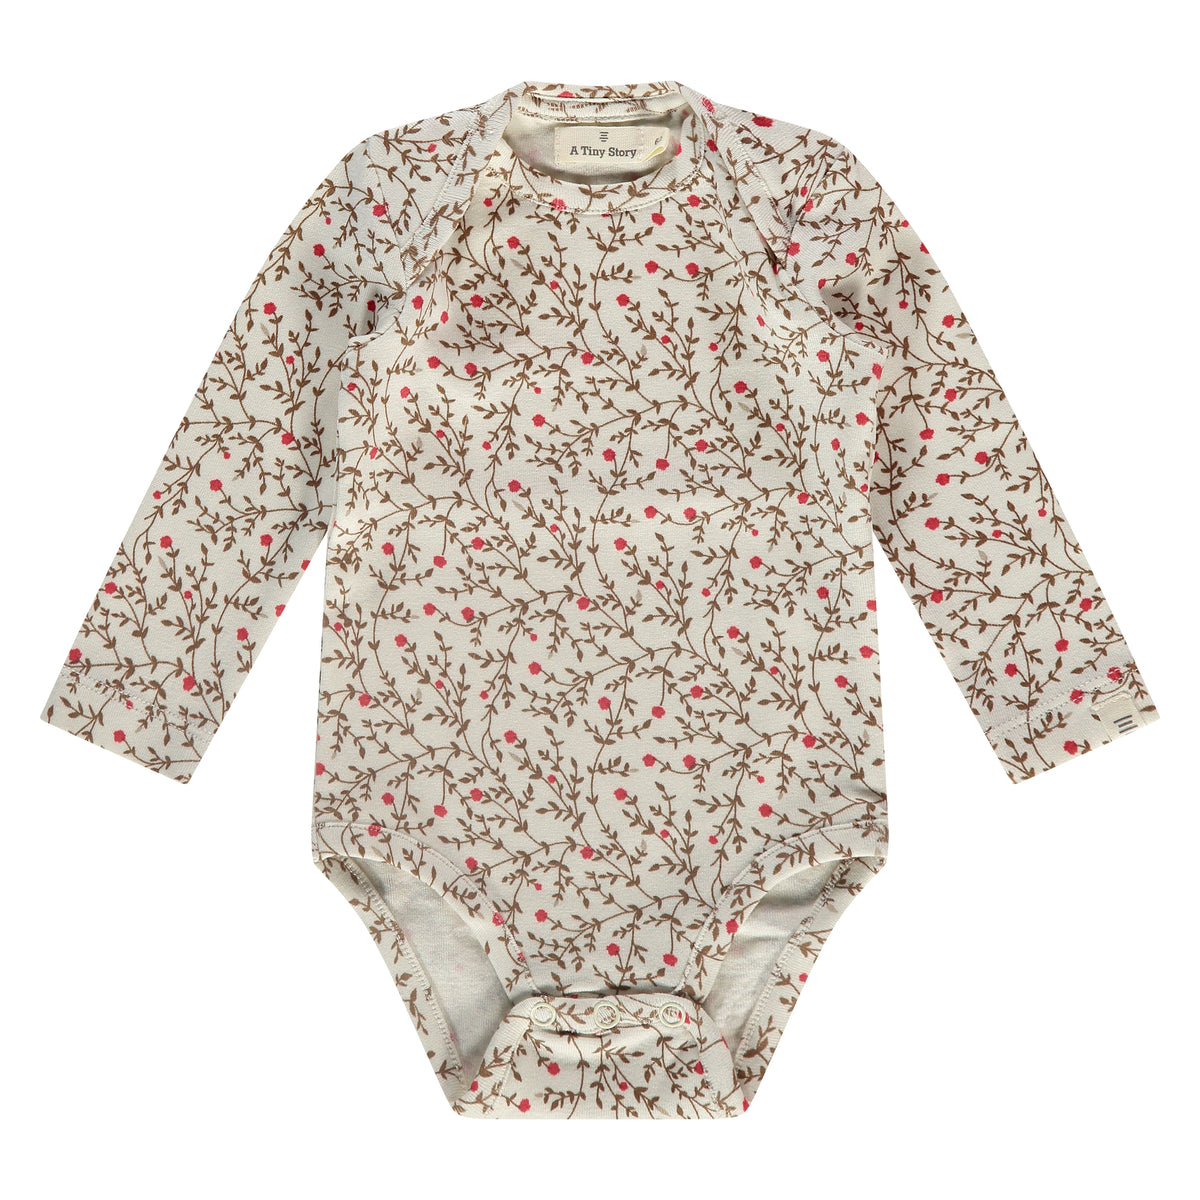 Baby romper flowers, A tiny story